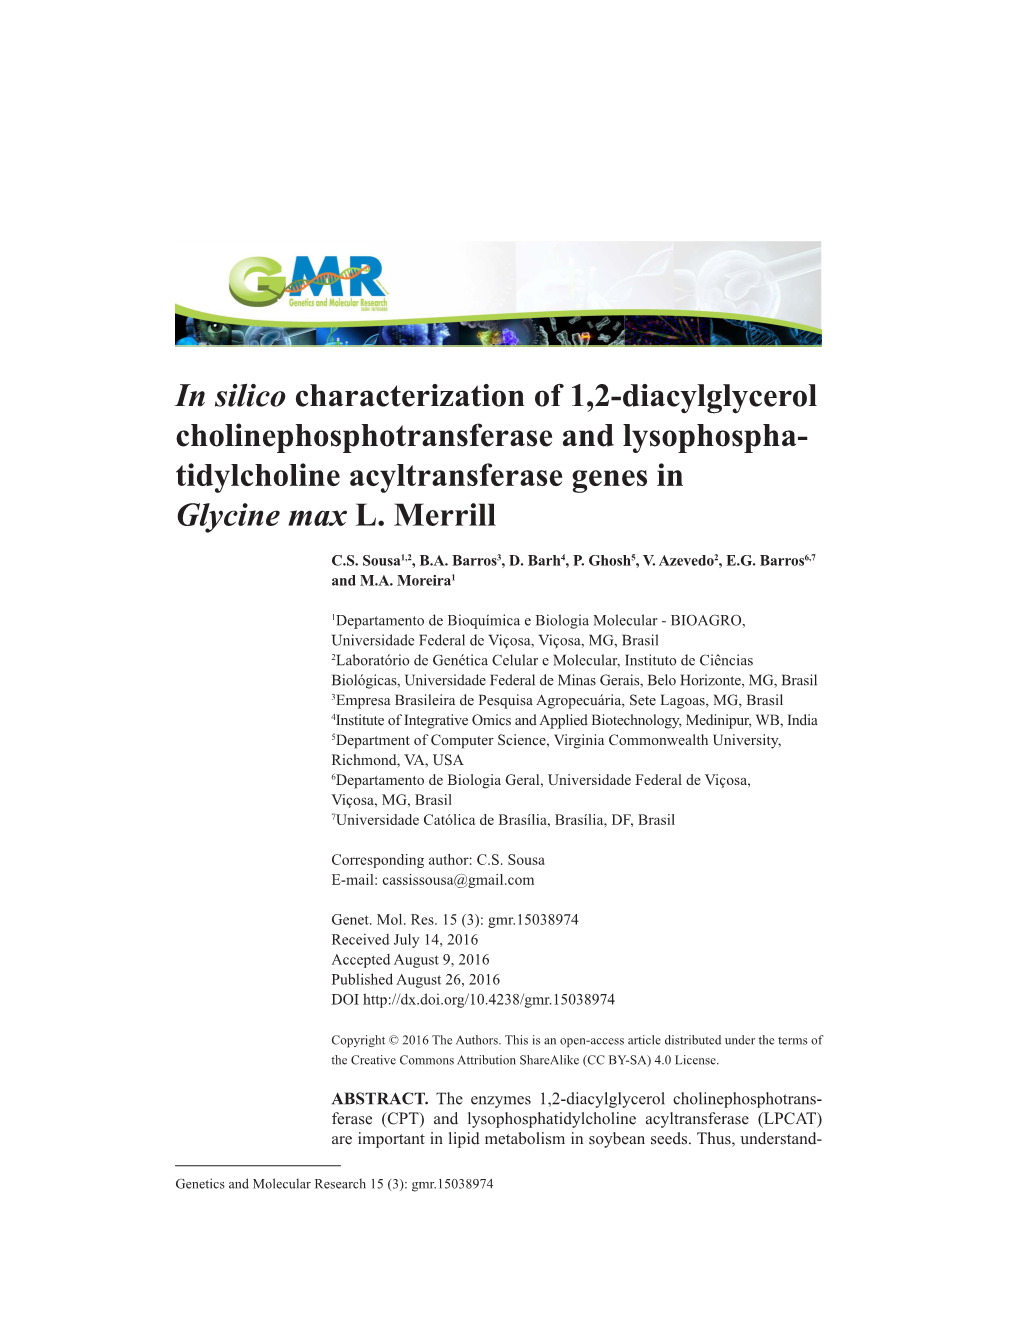 In Silico Characterization of 1,2-Diacylglycerol Cholinephosphotransferase and Lysophospha- Tidylcholine Acyltransferase Genes in Glycine Max L